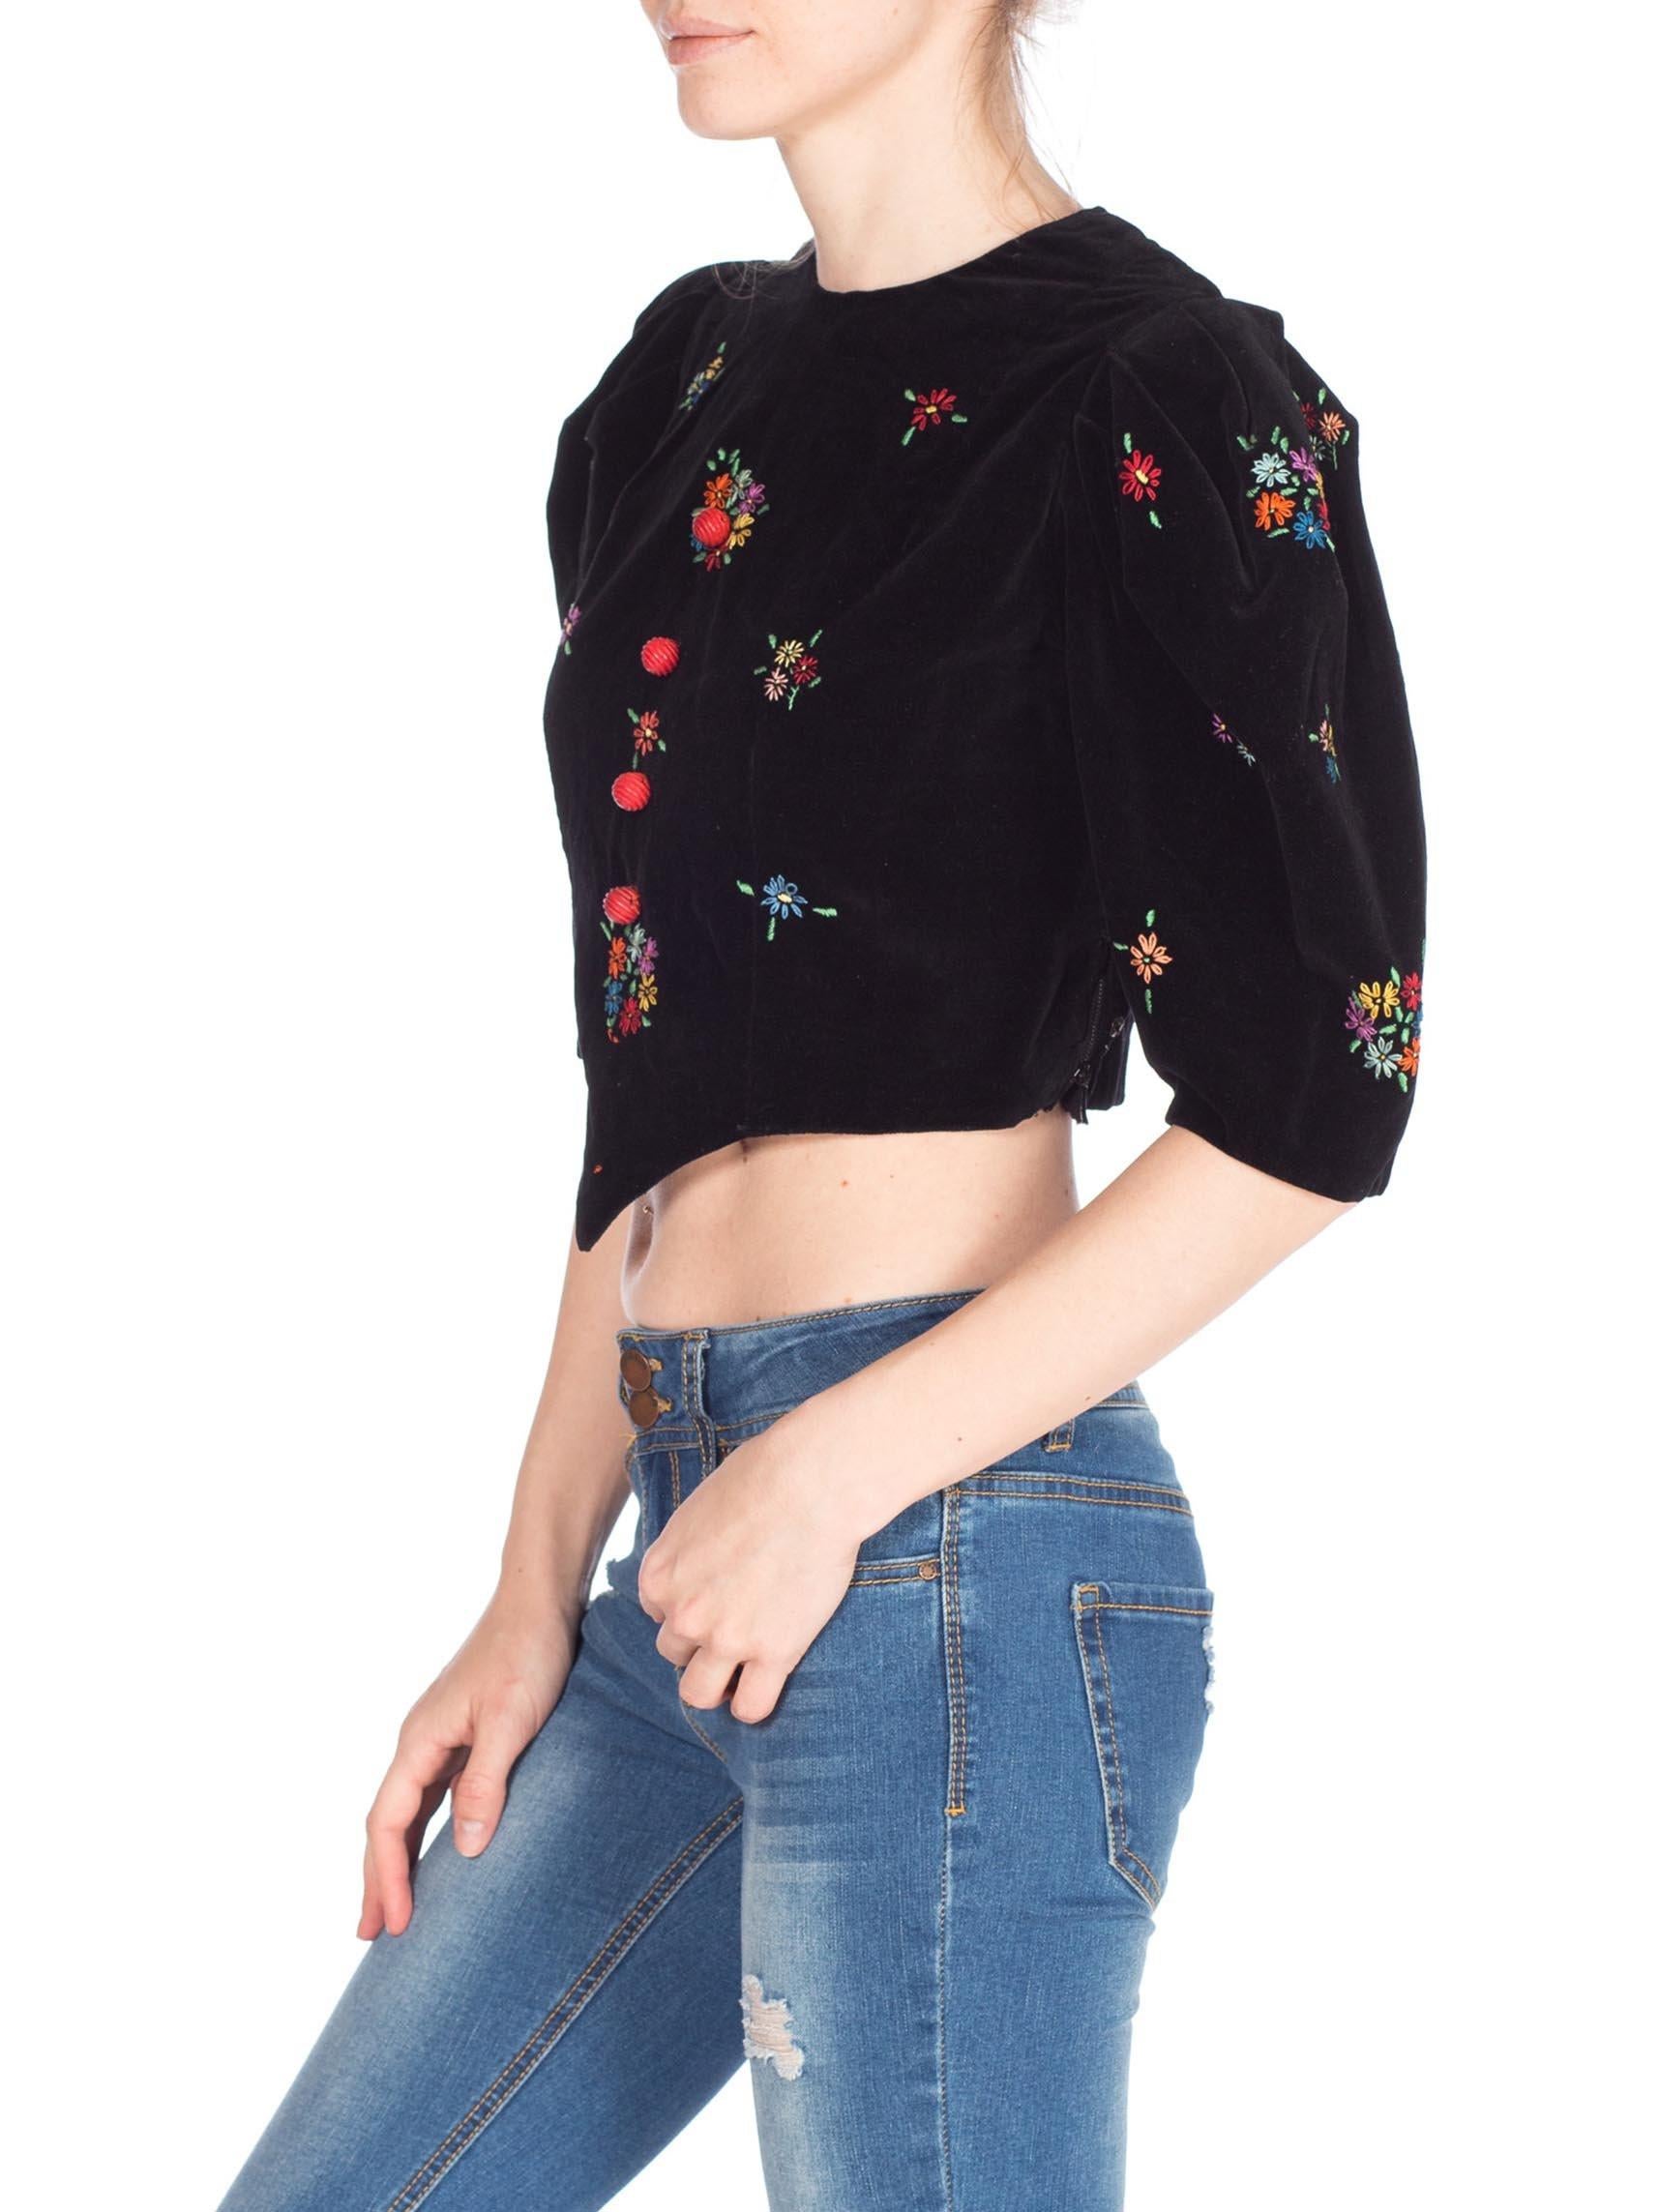 1940S Black Cotton Velvet  Top With Floral Embroidery & Red Wood Buttons 4